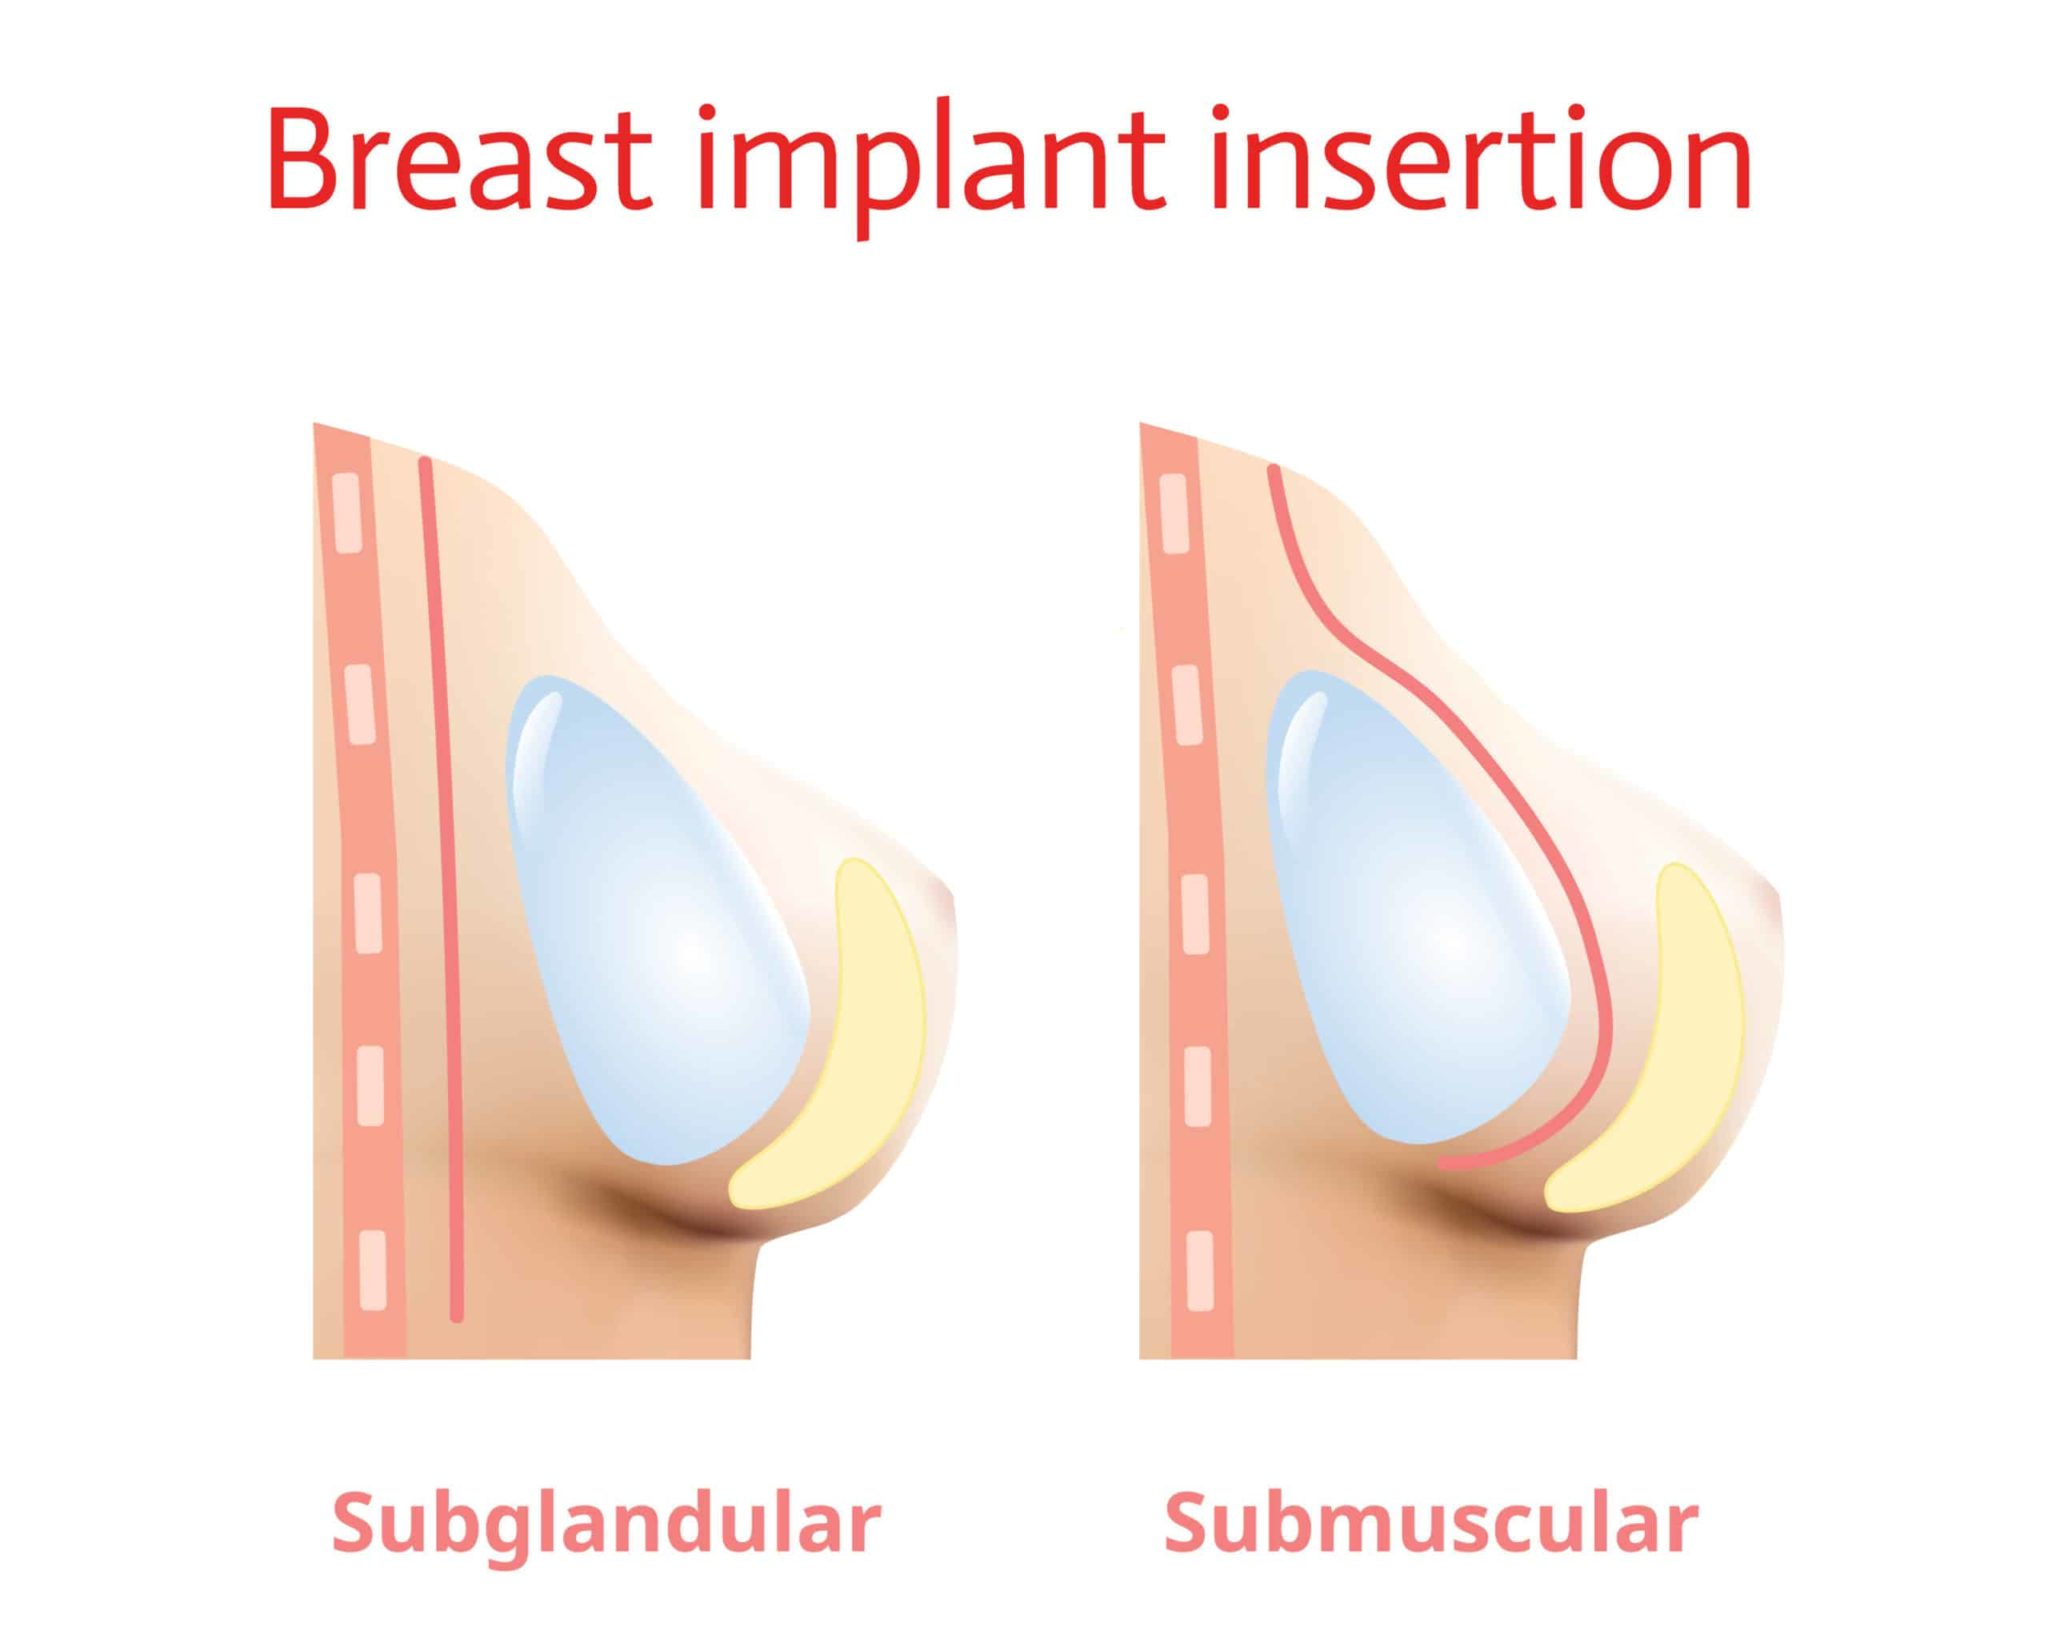 Should I get breast implants under the muscle or over?